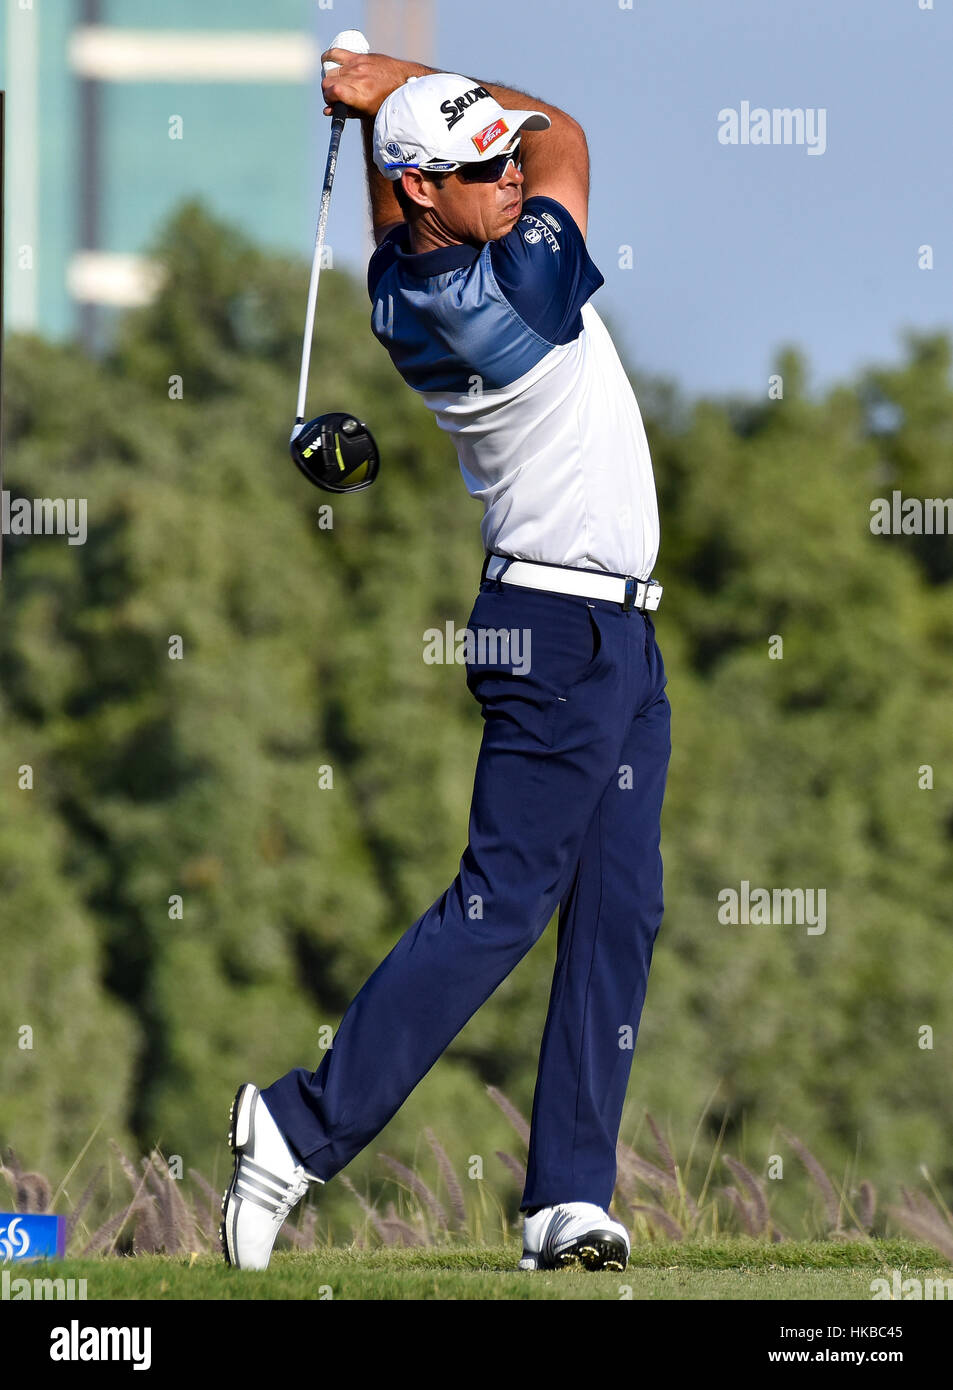 Doha, Qatar. 27th Jan, 2017. Jaco Van Zyl of South Africa competes during  the second round of the Commercial Bank Qatar Masters at Doha Golf Club in  Doha, Qatar. Credit: Nikku/Xinhua/Alamy Live